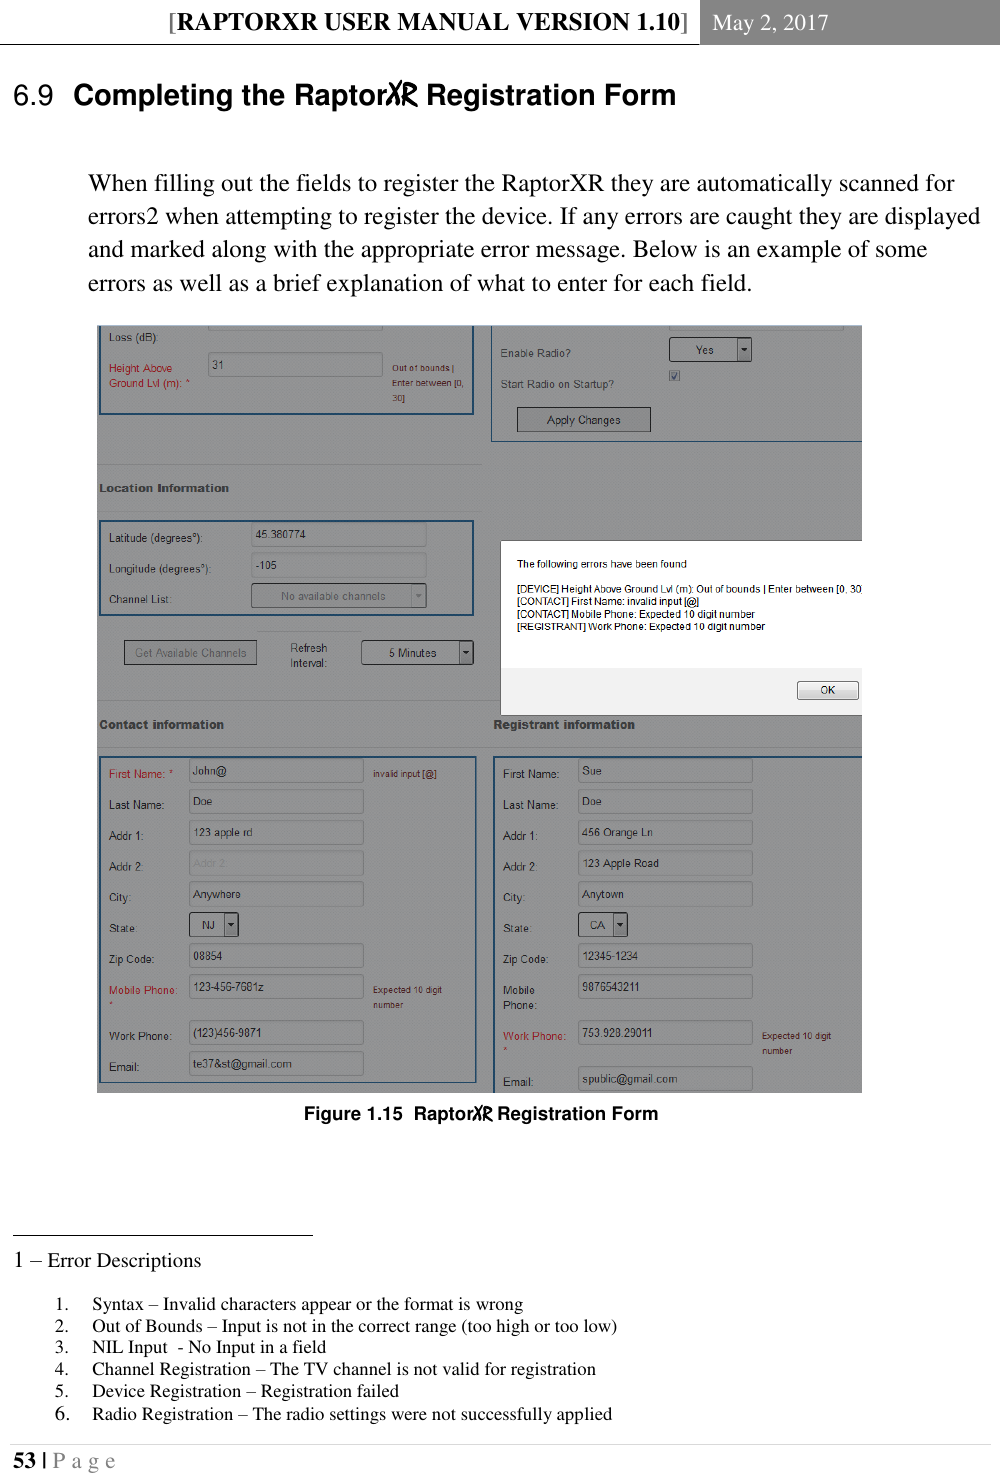 [RAPTORXR USER MANUAL VERSION 1.10] May 2, 2017  53 | P a g e    Completing the RaptorXR Registration Form 6.9 When filling out the fields to register the RaptorXR they are automatically scanned for errors2 when attempting to register the device. If any errors are caught they are displayed and marked along with the appropriate error message. Below is an example of some errors as well as a brief explanation of what to enter for each field.                                                                                  1 – Error Descriptions 1. Syntax – Invalid characters appear or the format is wrong 2. Out of Bounds – Input is not in the correct range (too high or too low) 3. NIL Input  - No Input in a field 4. Channel Registration – The TV channel is not valid for registration 5. Device Registration – Registration failed  6. Radio Registration – The radio settings were not successfully applied Figure 1.15  RaptorXR Registration Form 